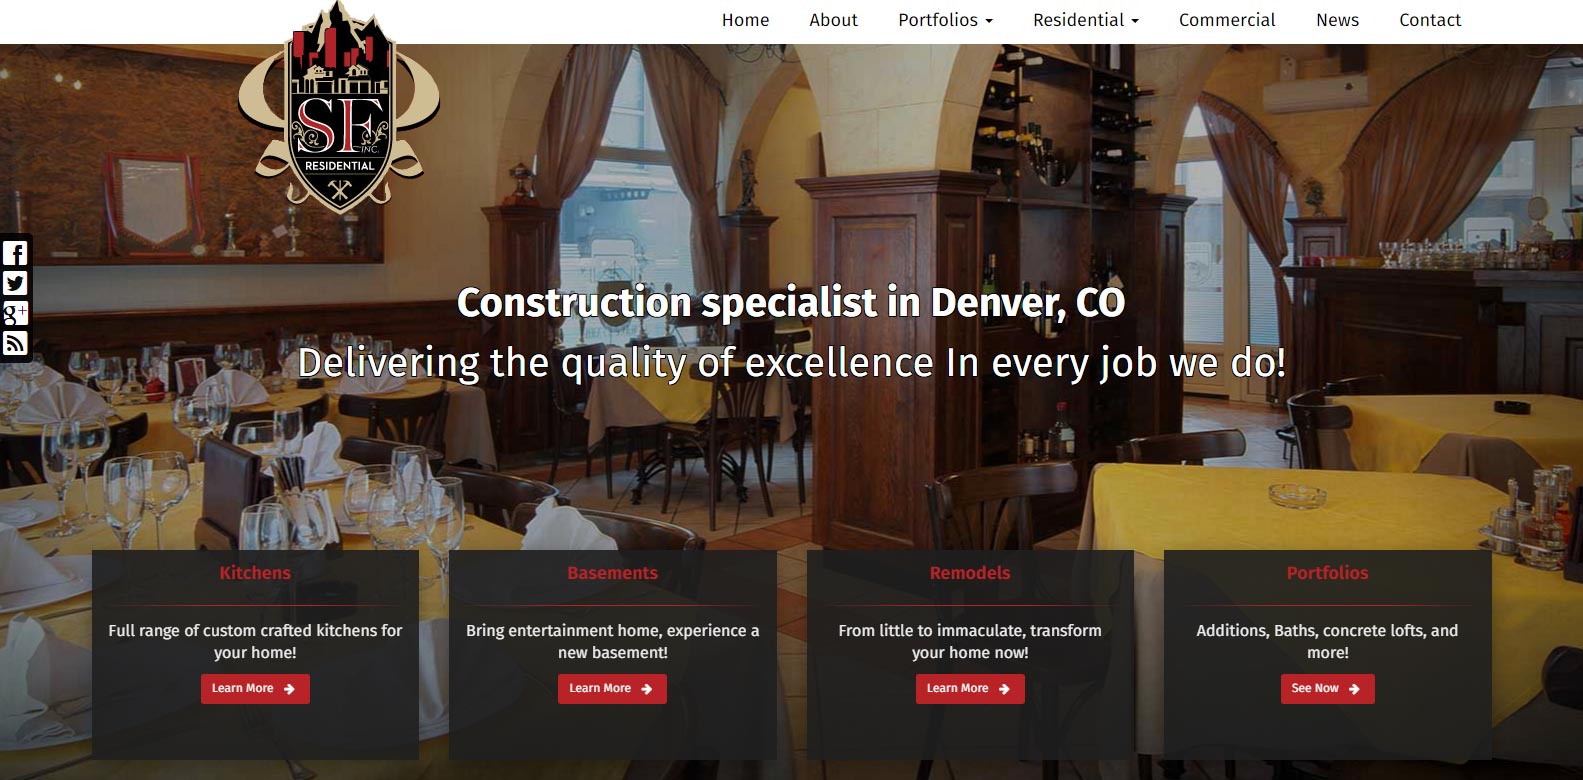 
New Website Launched: SF Inc. Construction